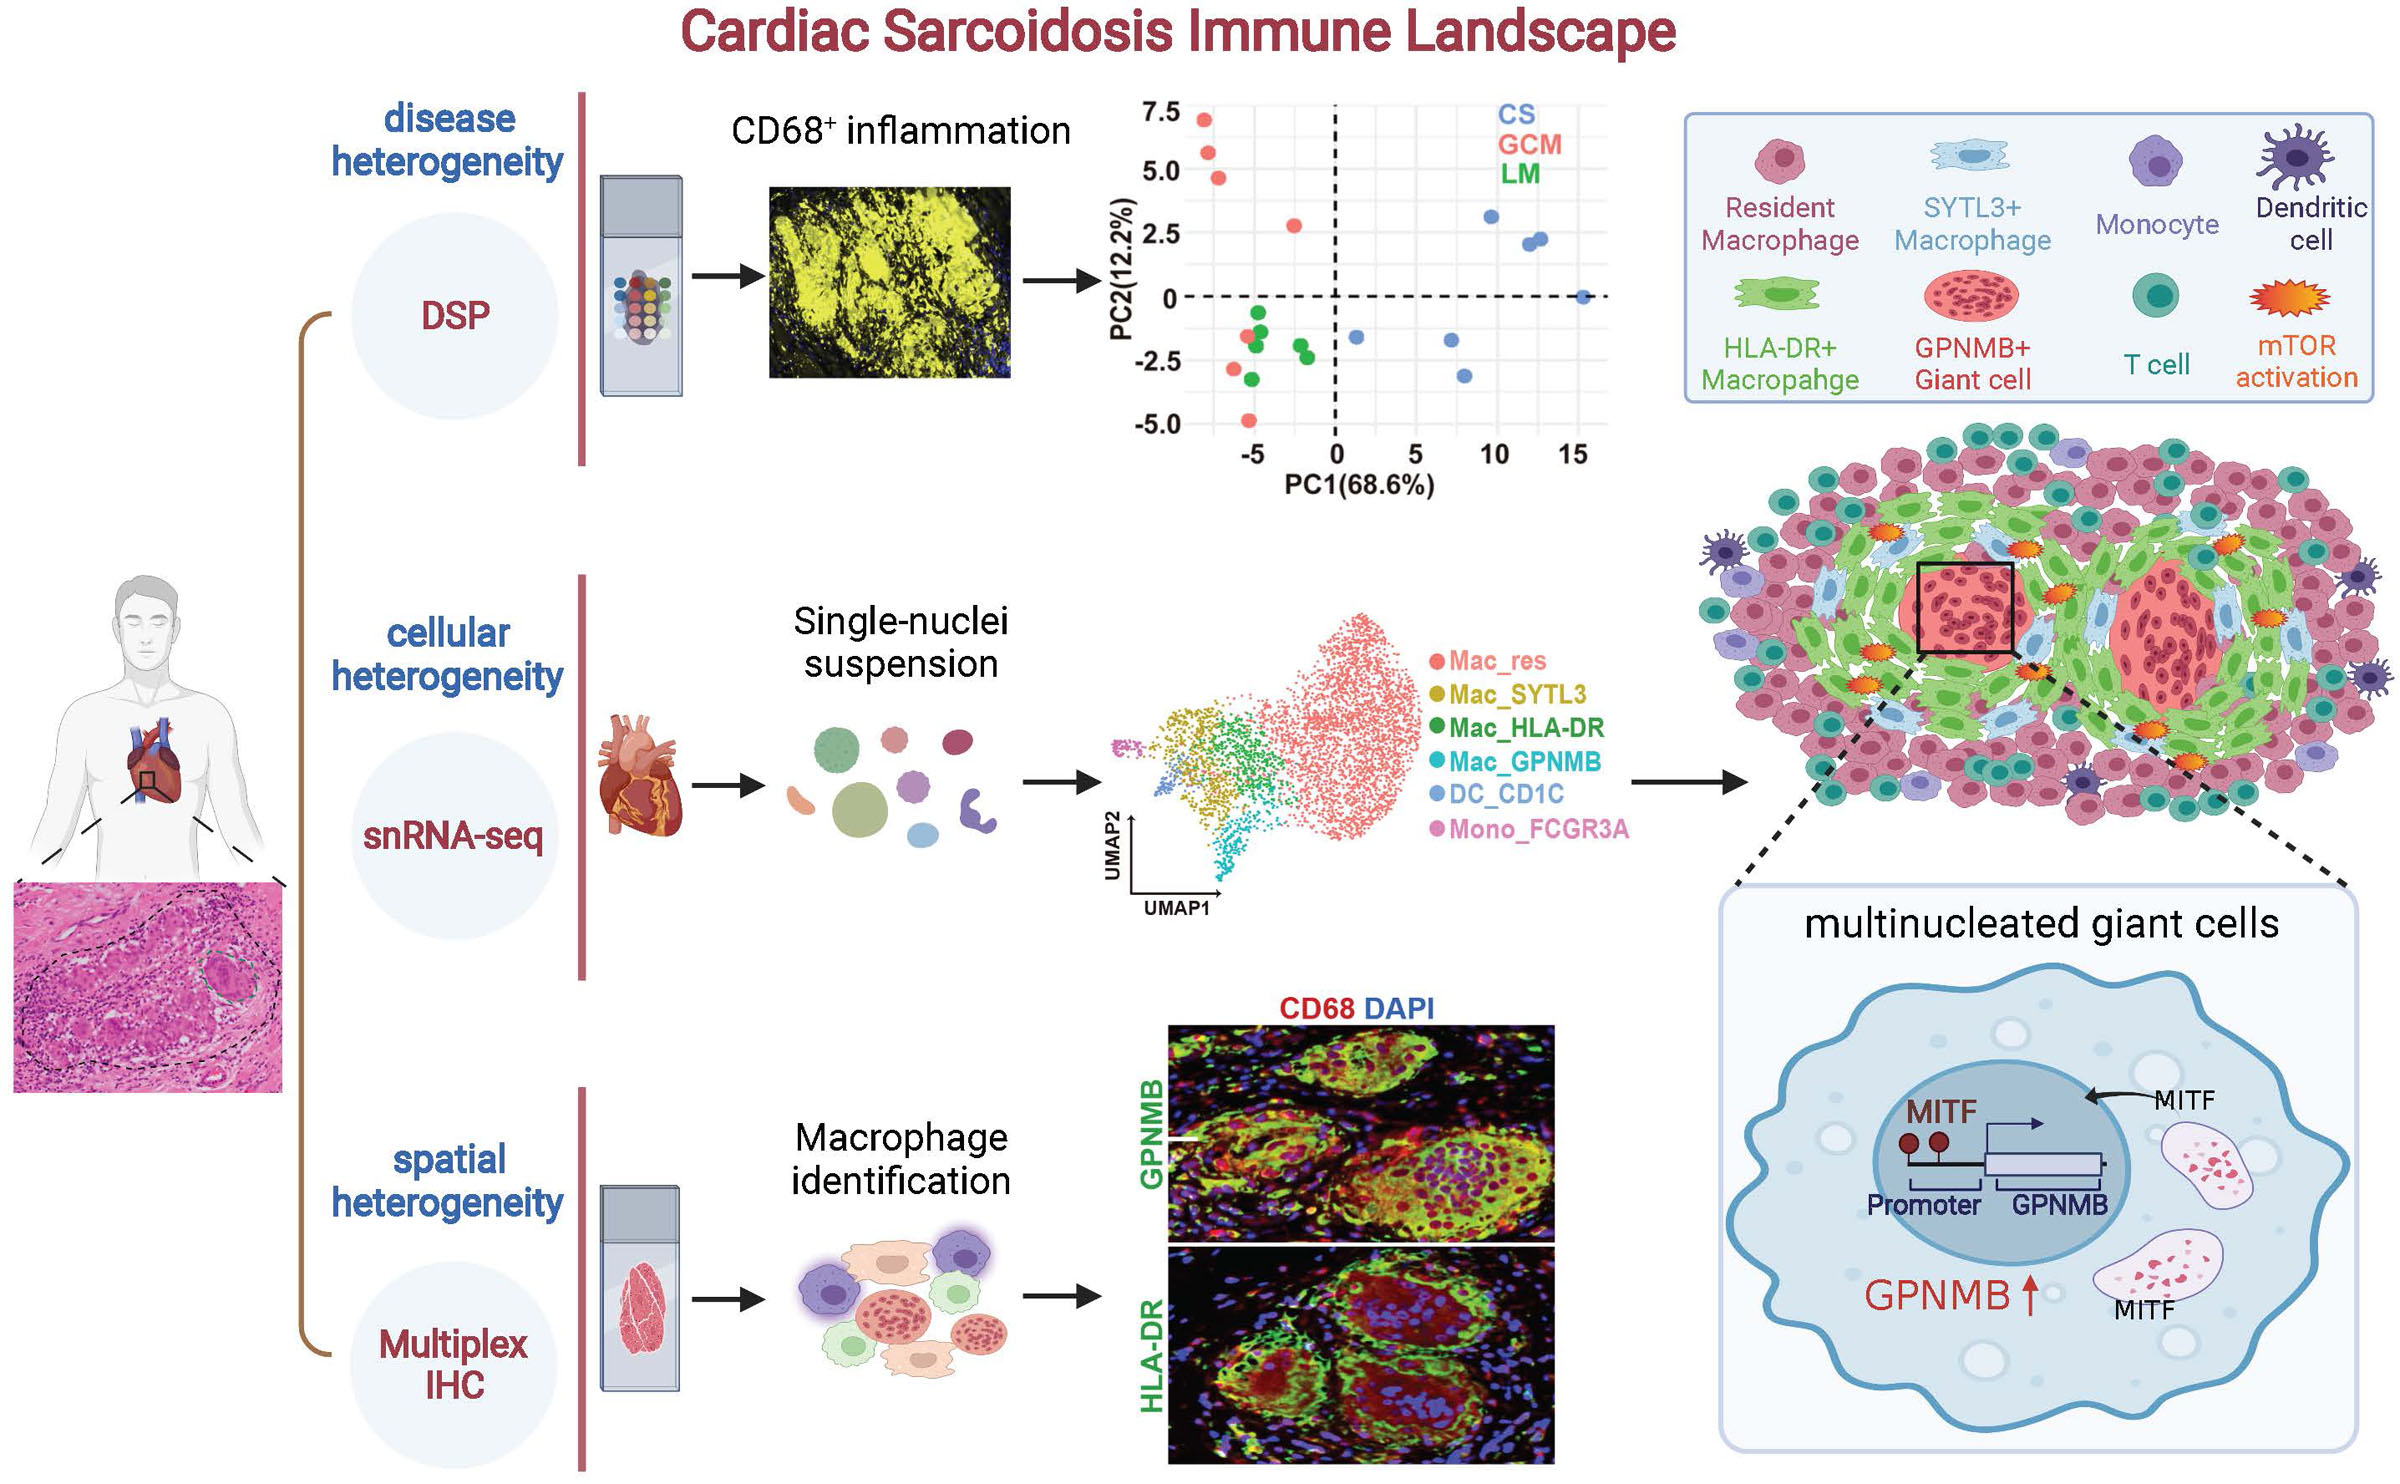 Transcriptional and Immune Landscape of Cardiac Sarcoidosis